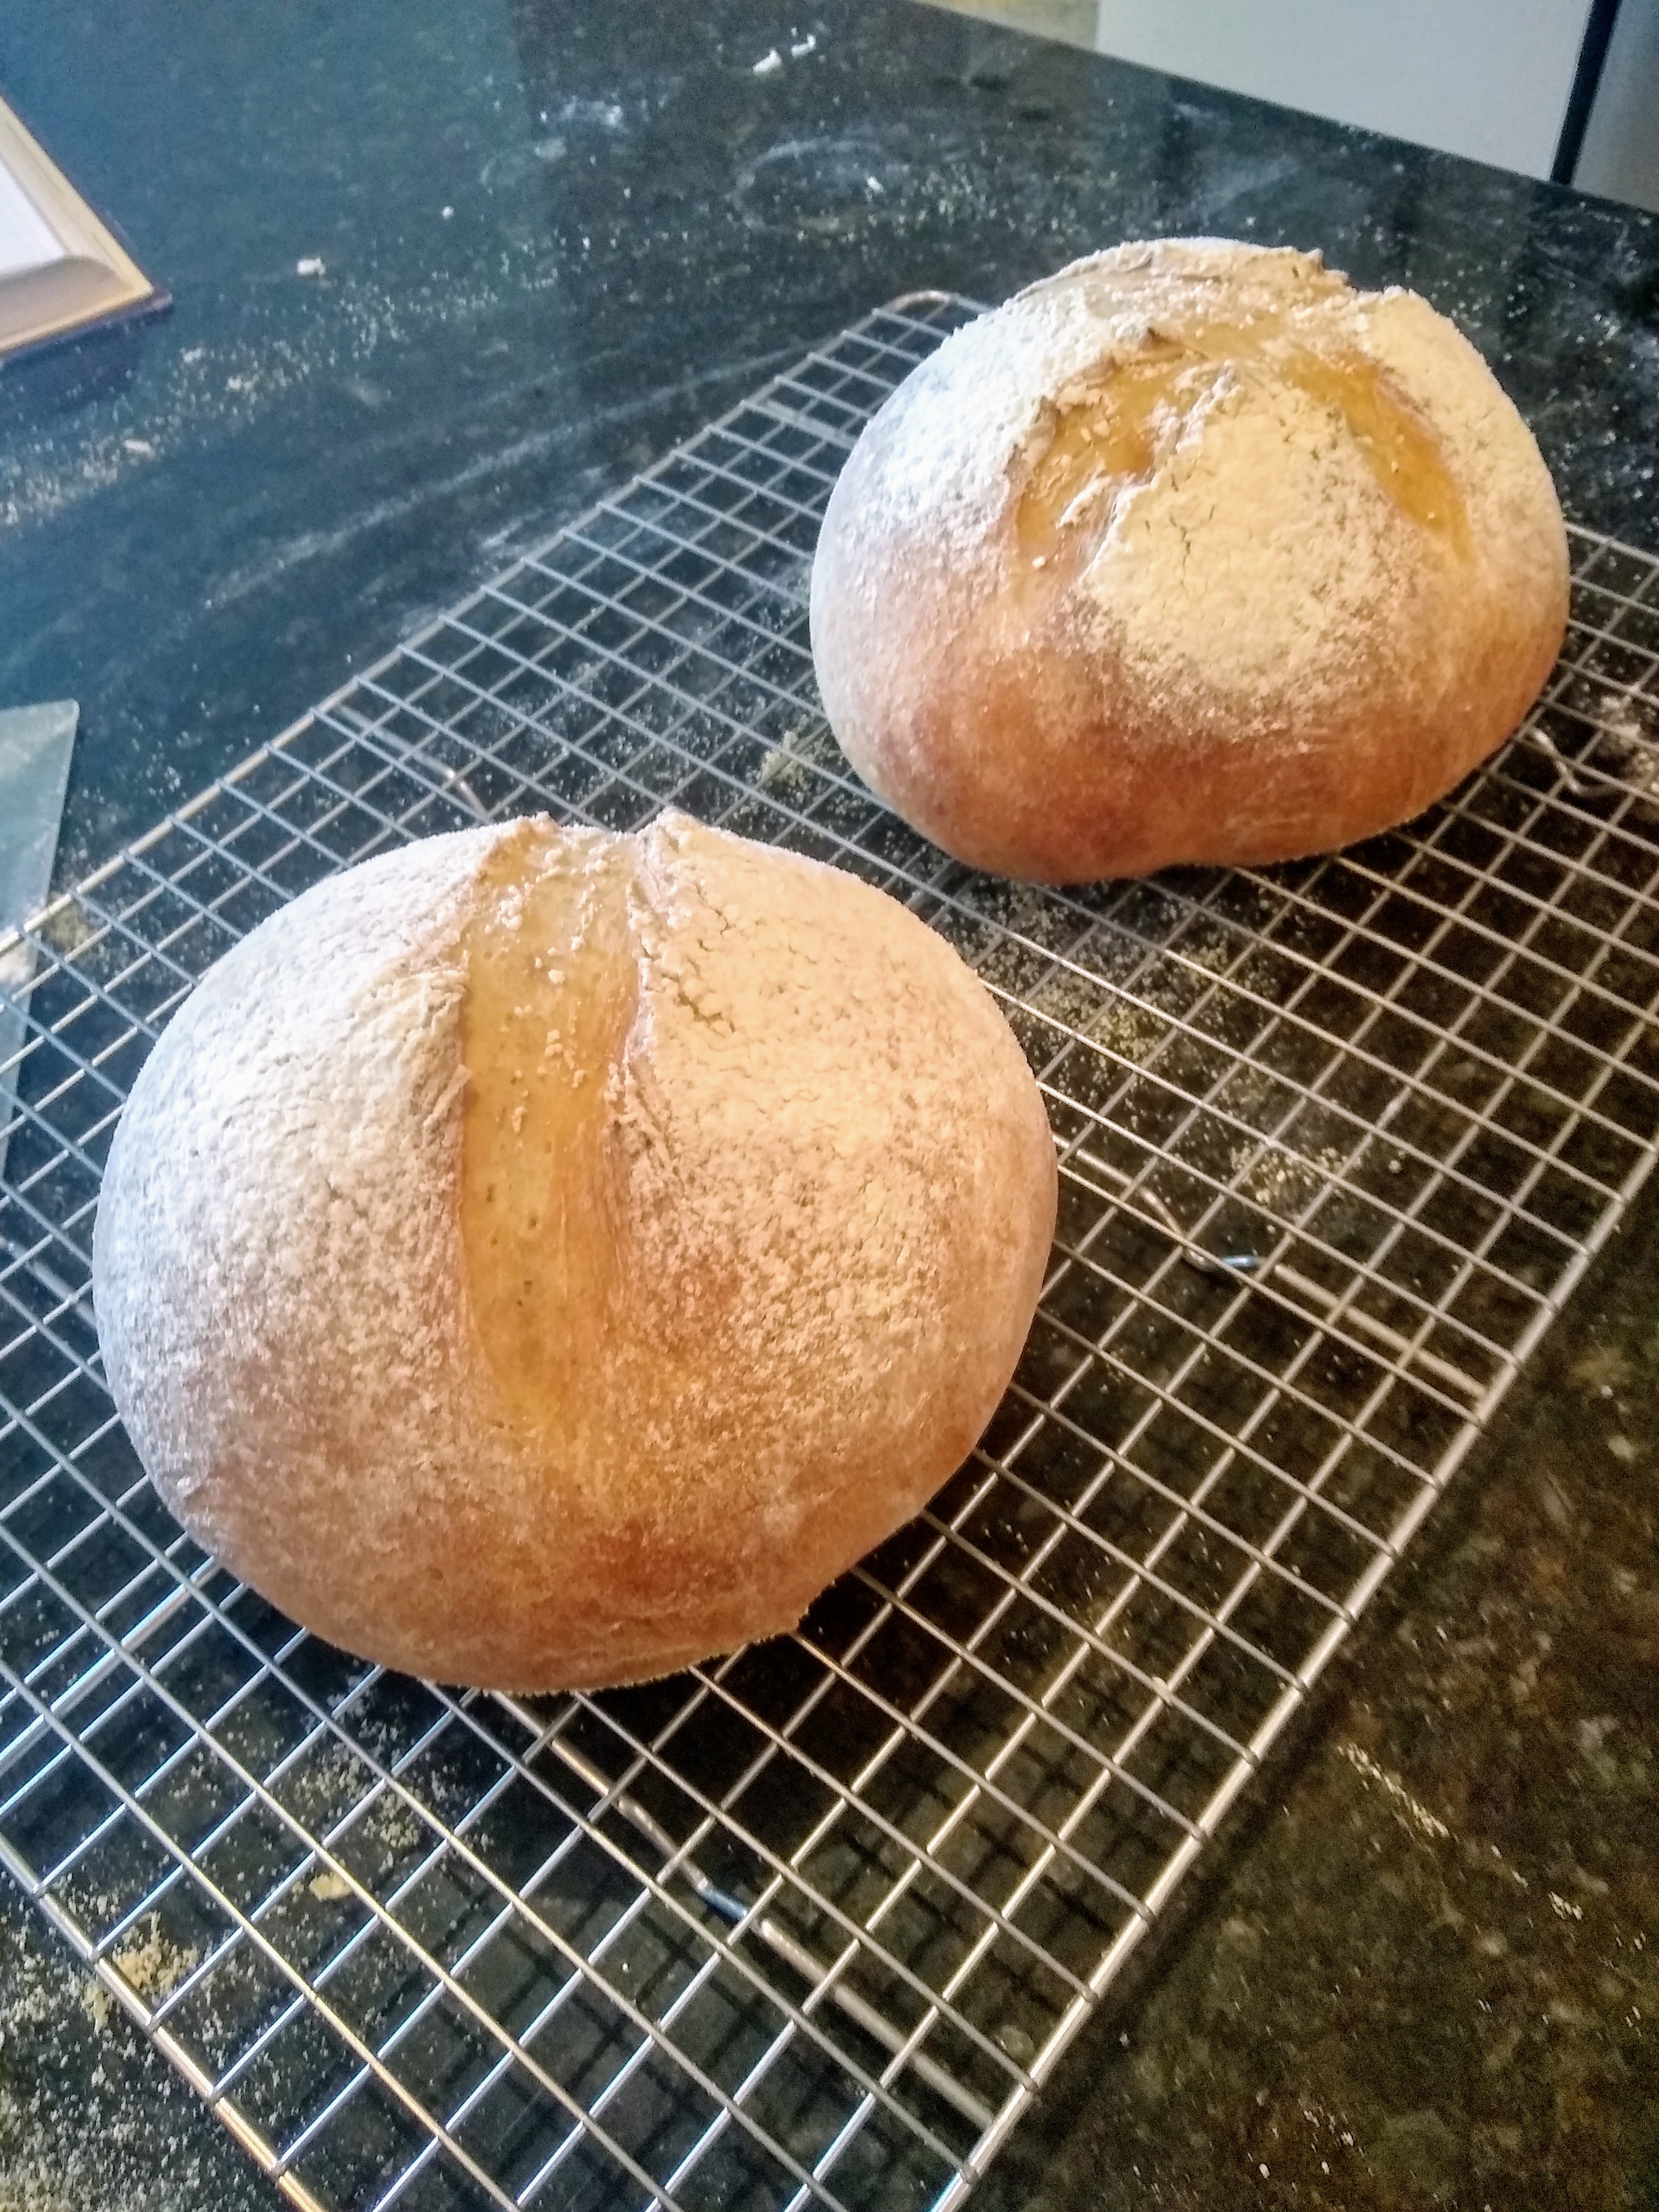 Finished loaves of Tuscan bread.